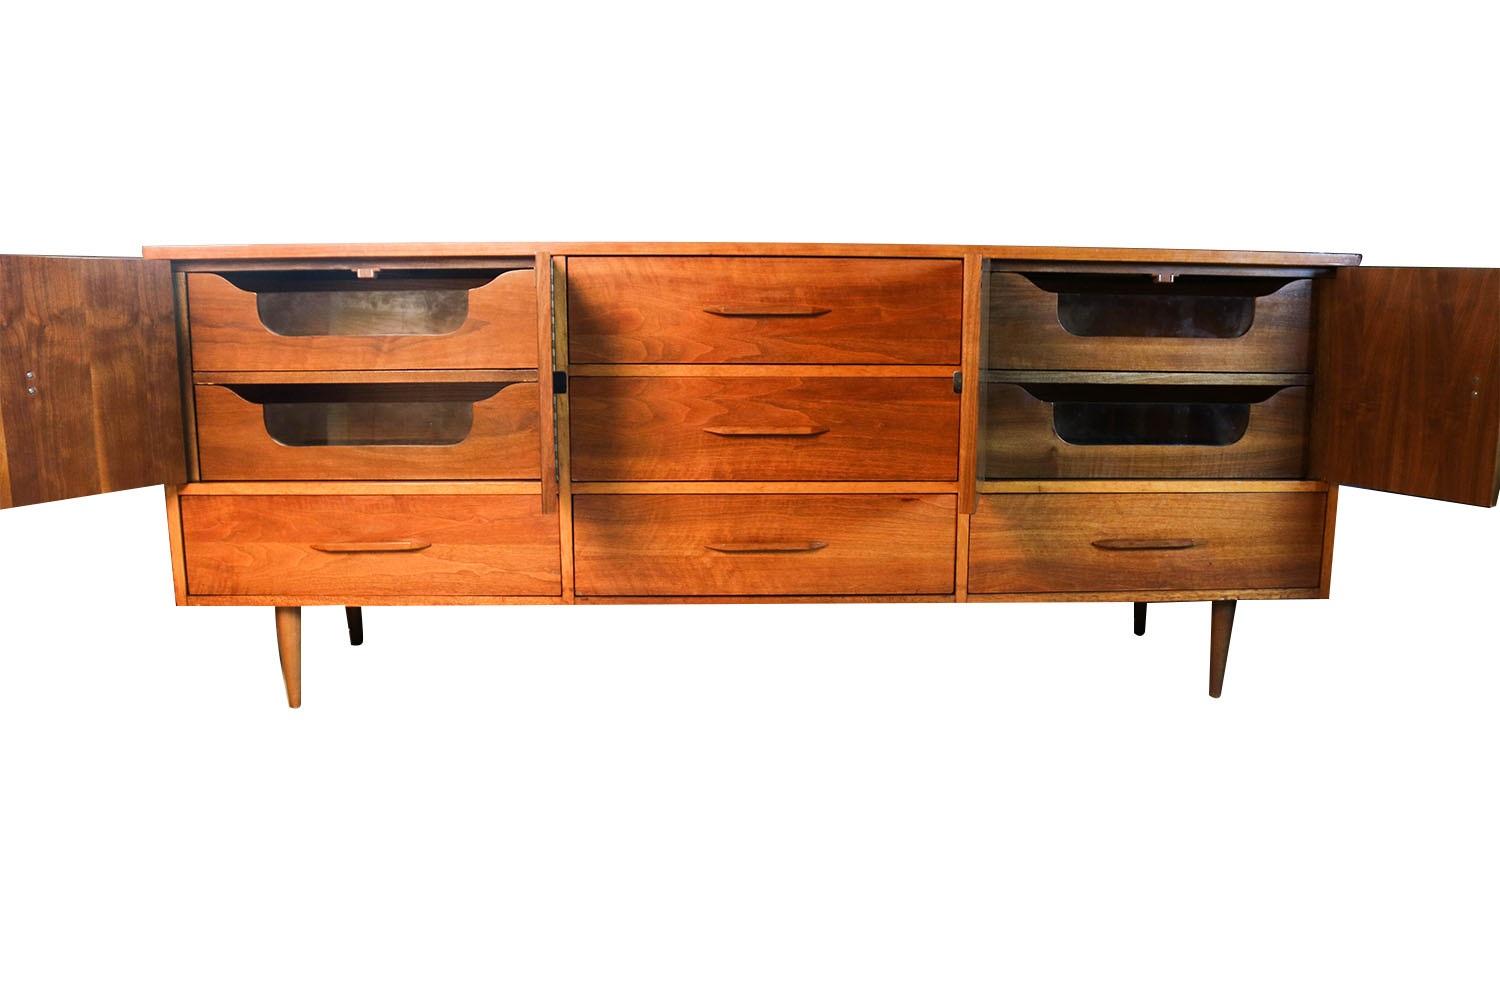 A Mid-Century Modern mixed wood triple dresser. This distinctive 9-drawer dresser with a Minimalist design allows for ample storage in a modest footprint. A simple and elegant dresser featuring 3 center drawers that are flaked by a set of double